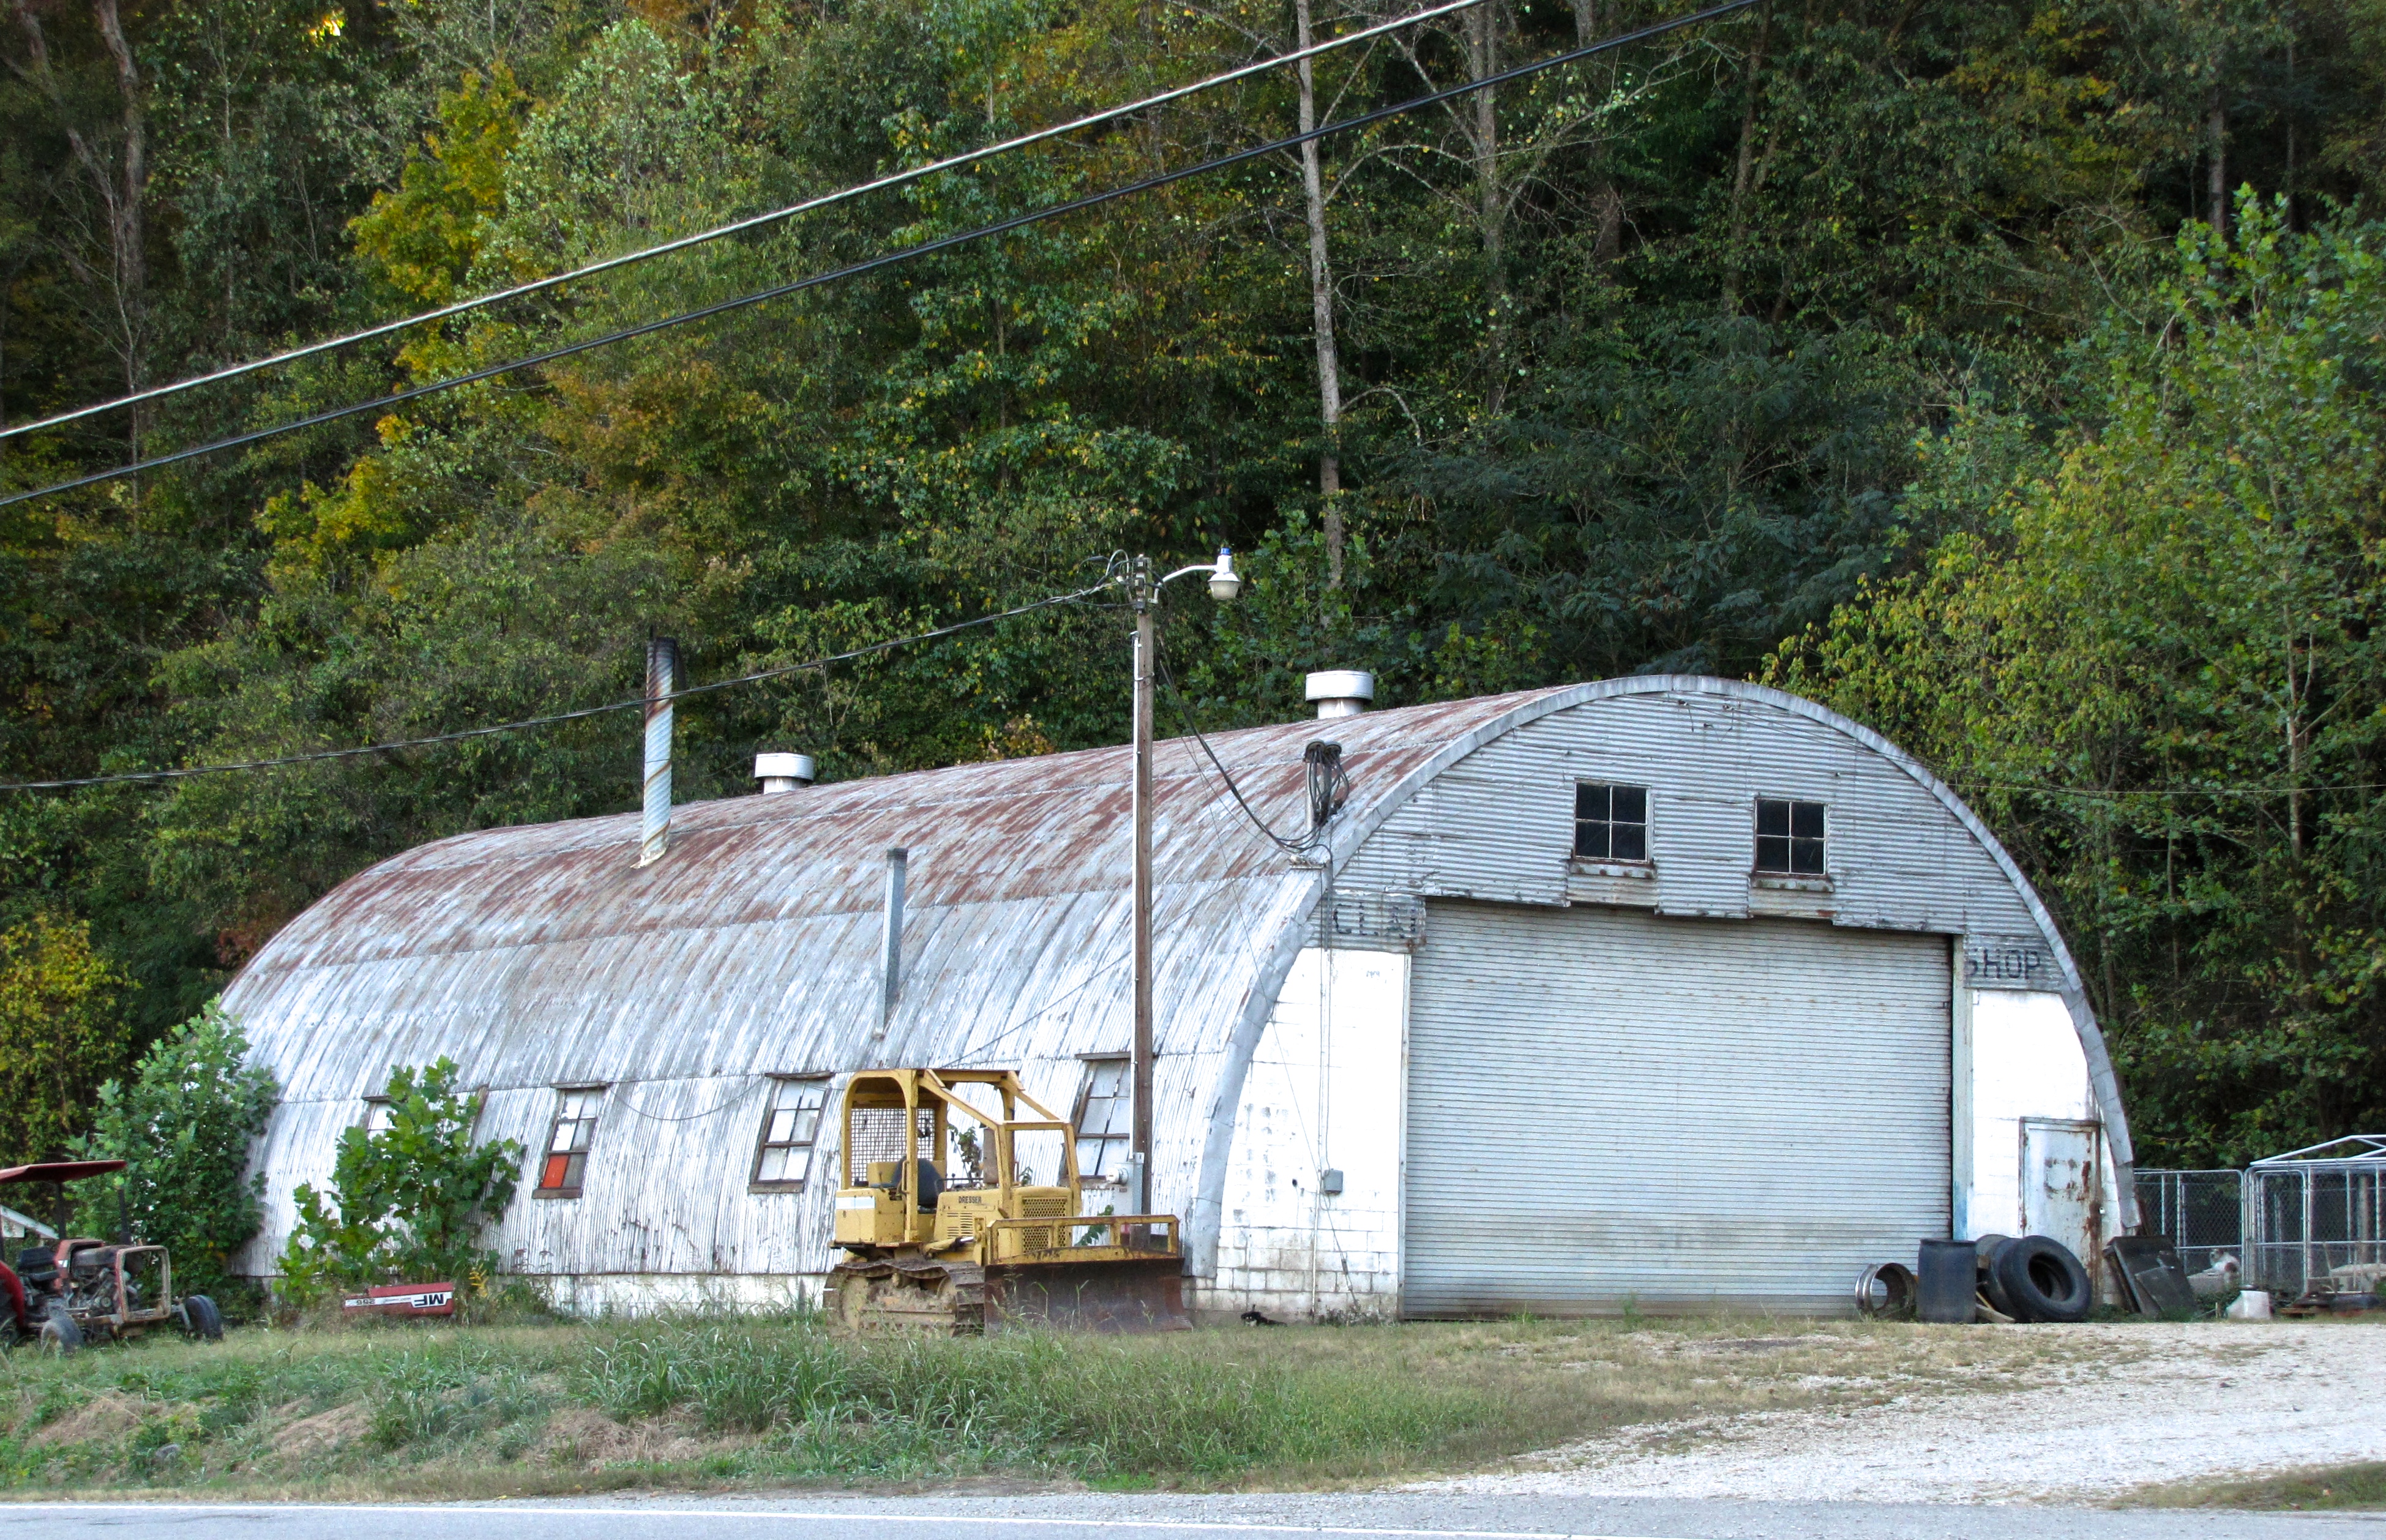 quonset hut in Privacy Policy, MO